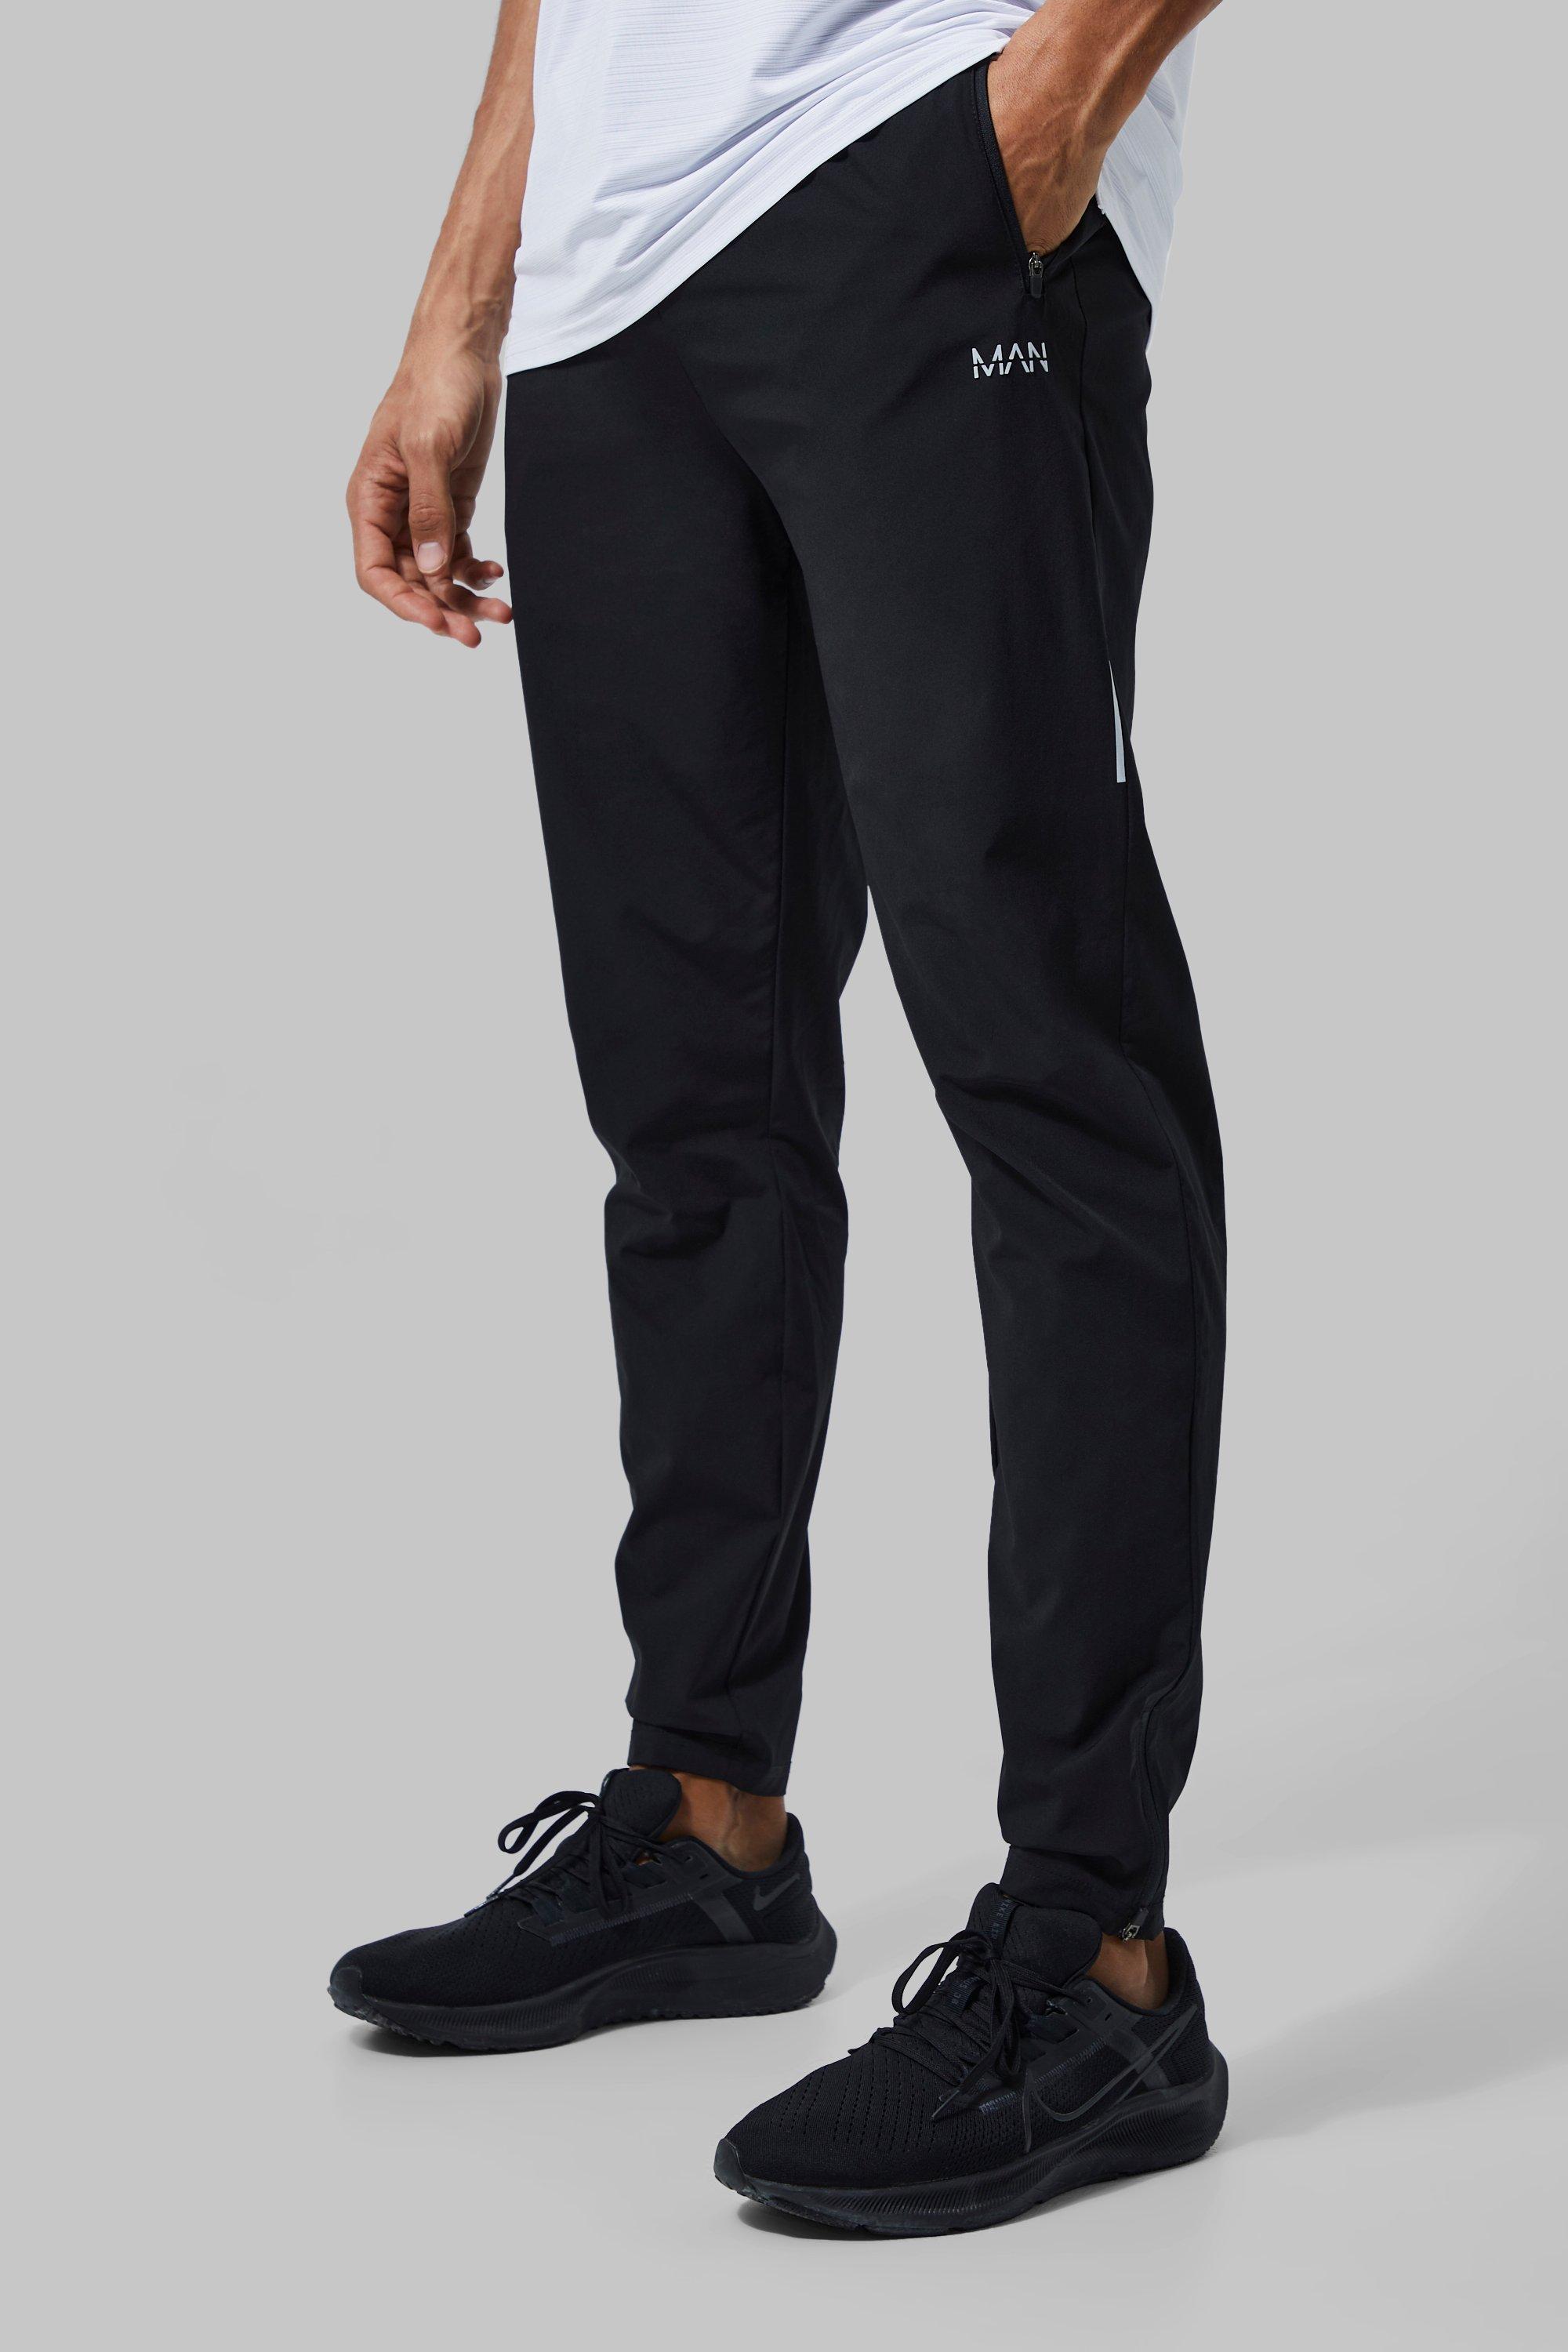 Men's Tall Joggers, Joggers for Tall Guys